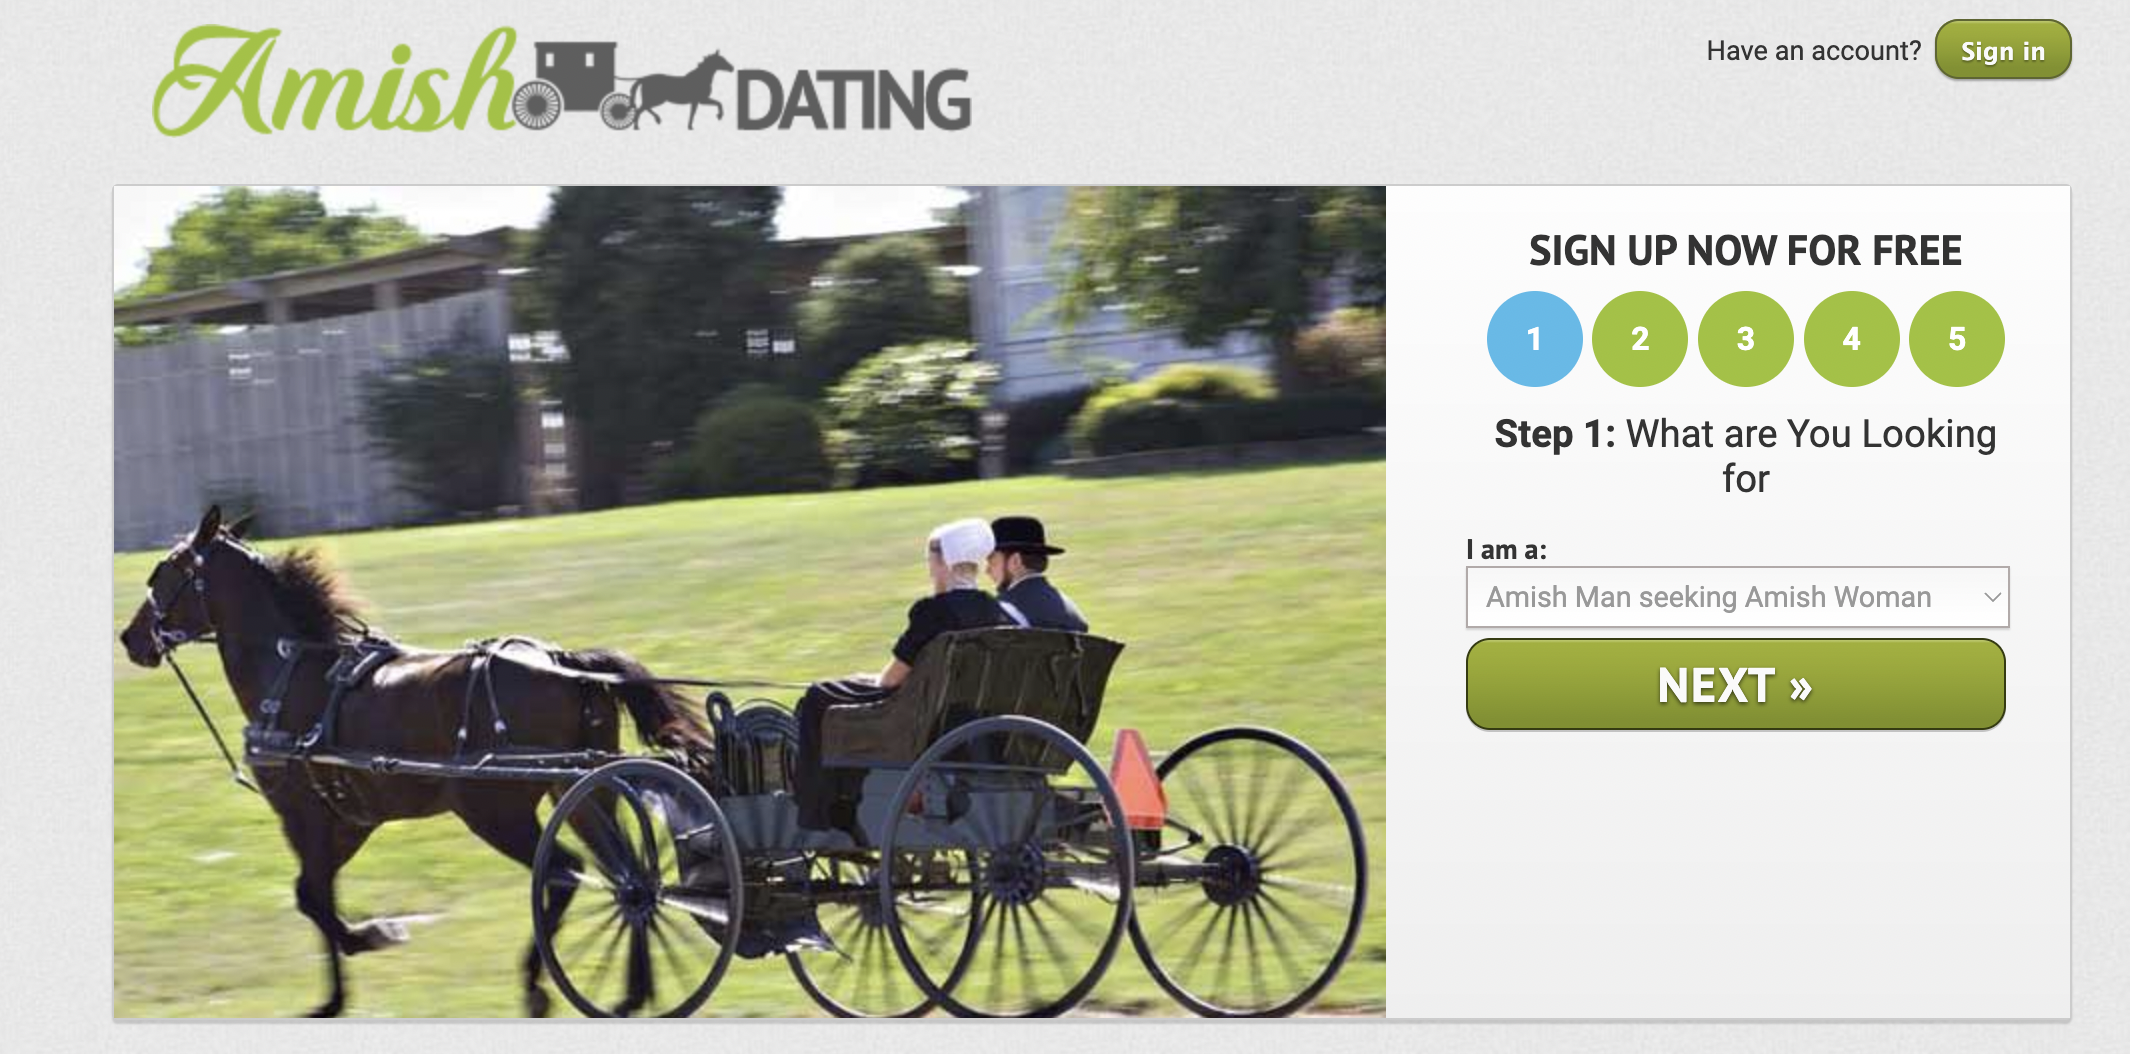 horse and buggy - Amish Dating Have an account? Sign in Sign Up Now For Free 00000 Step 1 What are You Looking I am a for Amish Man seeking Amish Woman Next >>